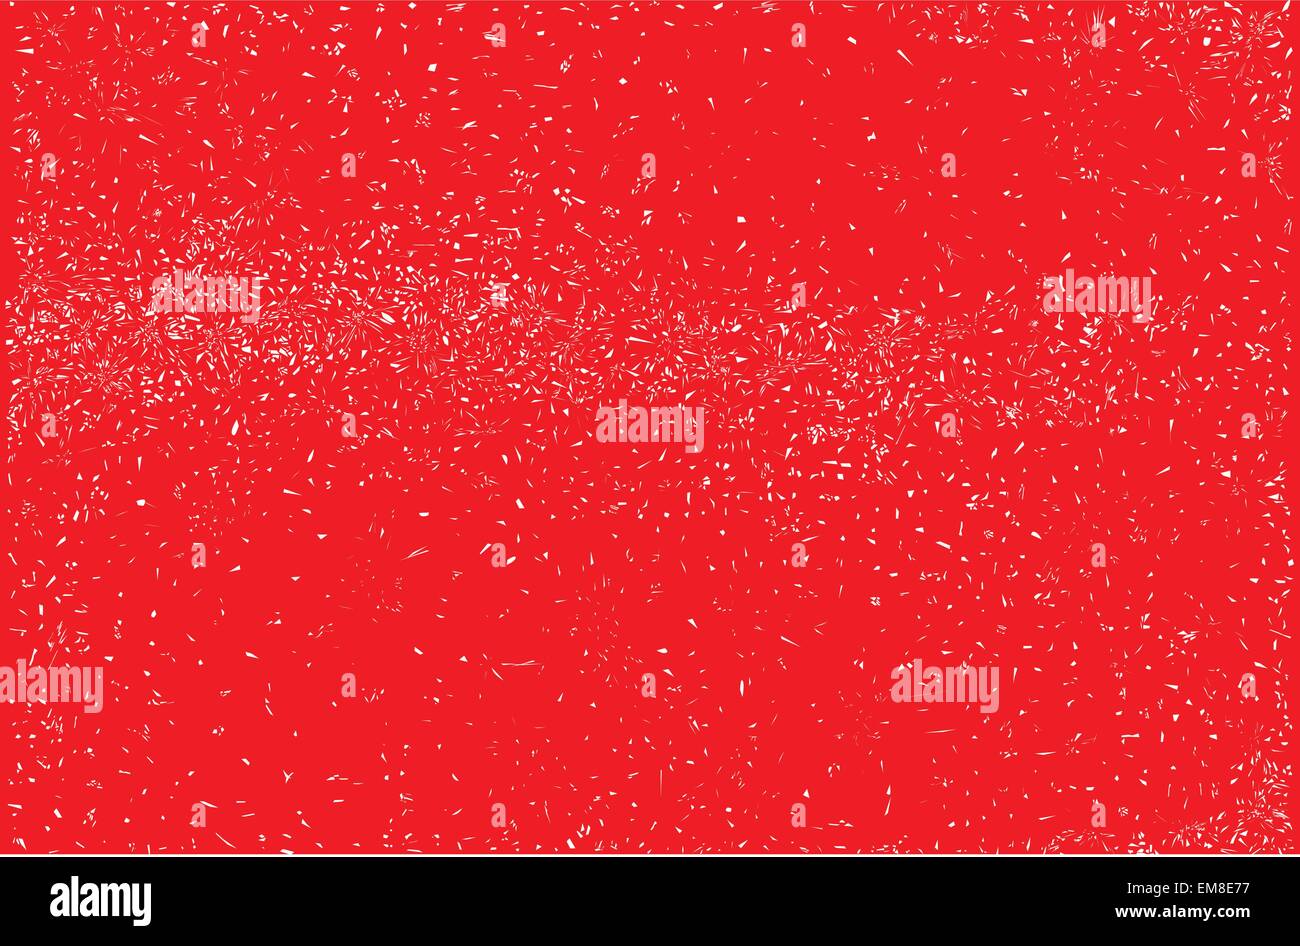 Red Fleck Stock Vector